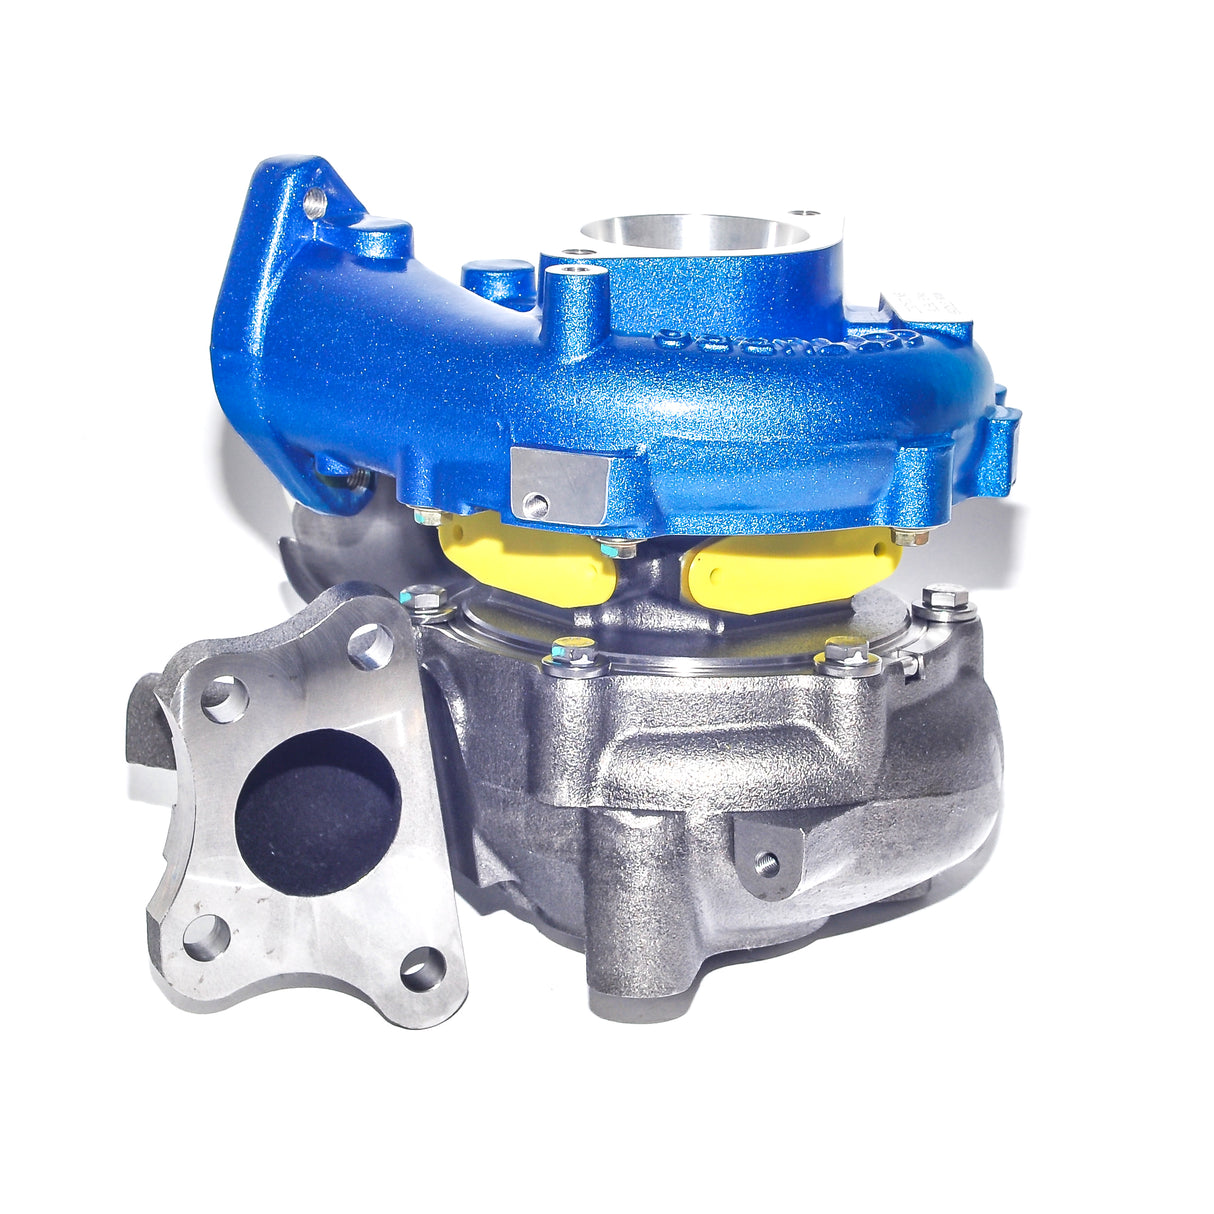 CCT Stage One Billet Turbo charger To Suit Nissan Navara D40 YD25 2.5L Nissan Pathfinder R51 2.5L